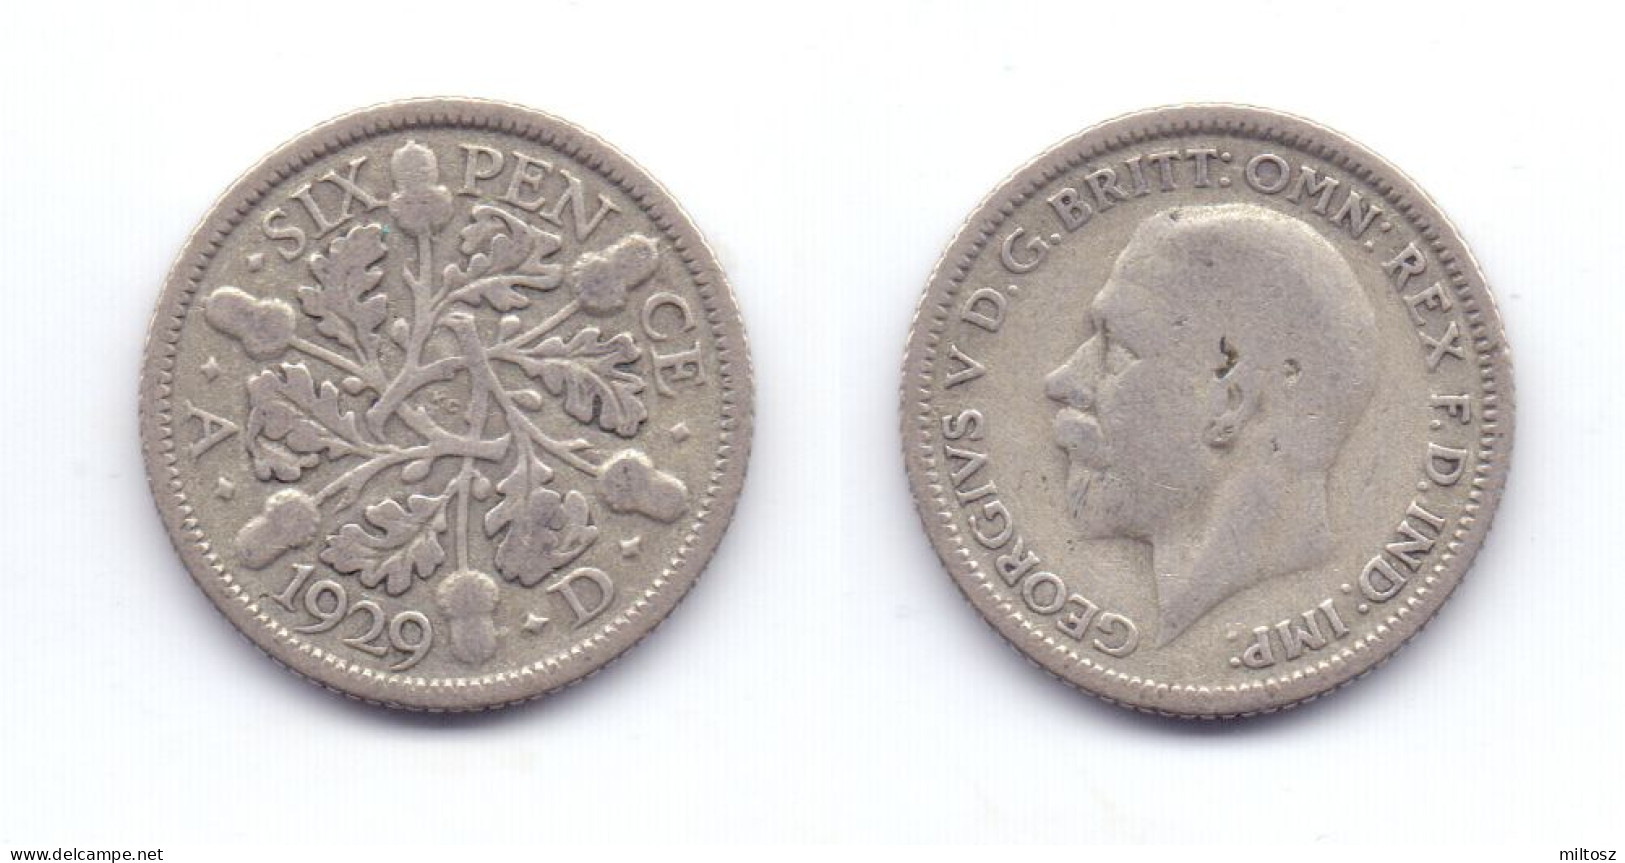 Great Britain 6 Pence 1929 - H. 6 Pence